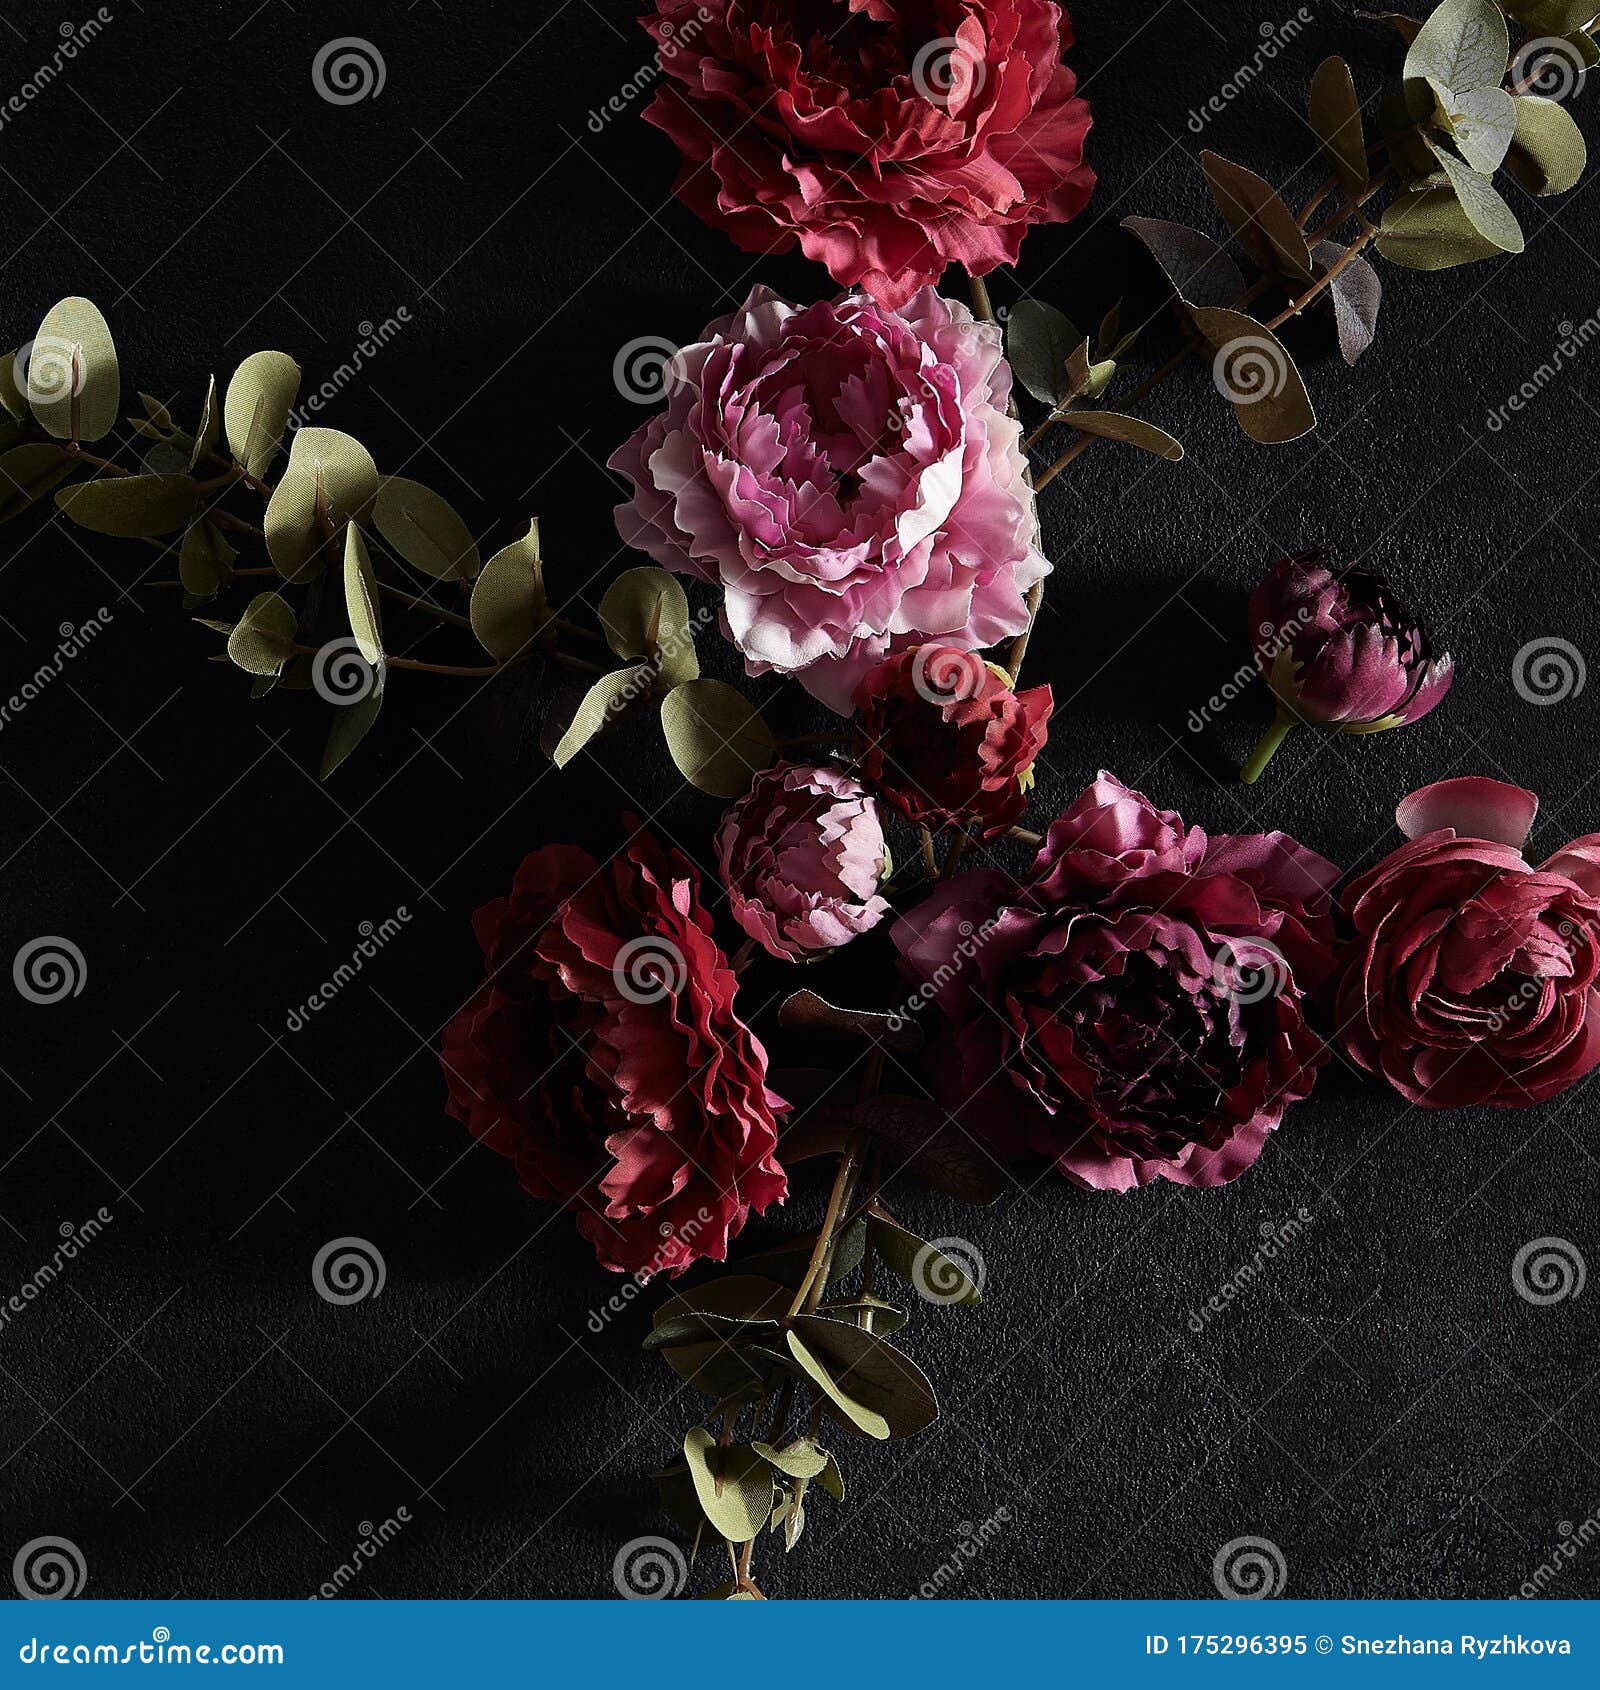 moody floral concept - flower on dark textured background, square composition